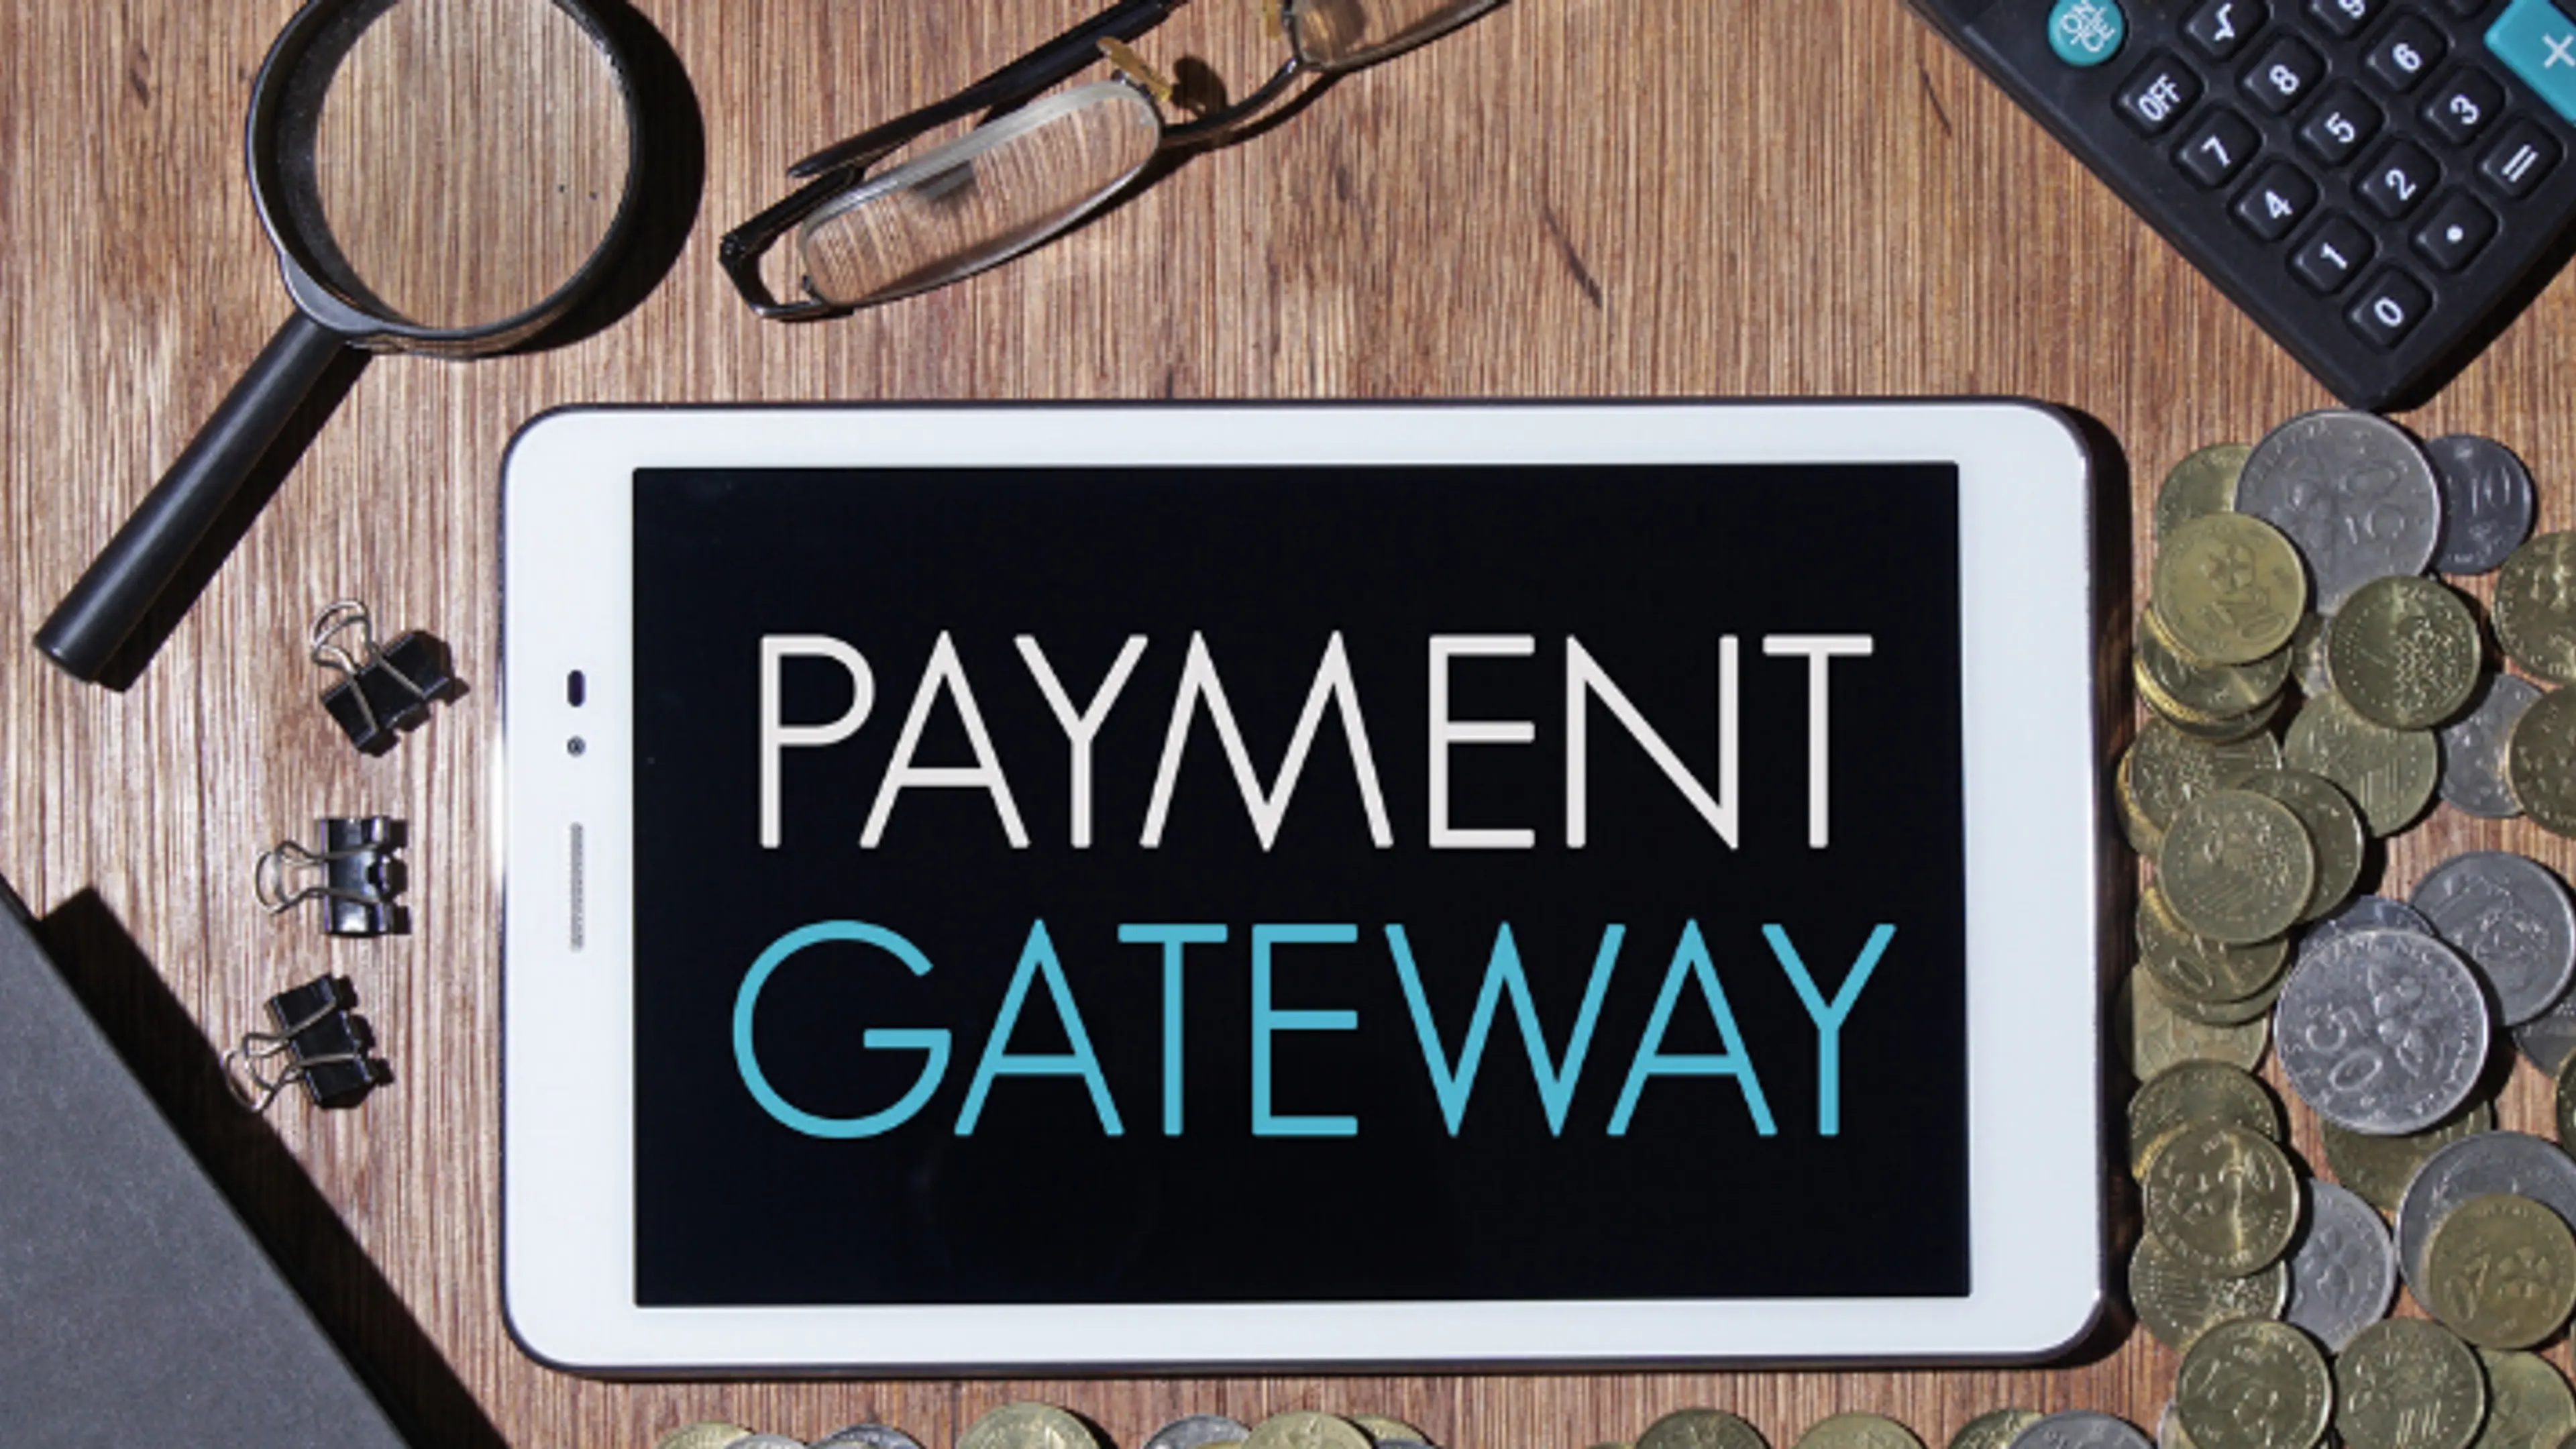 Choosing the right payment gateway for your startup

